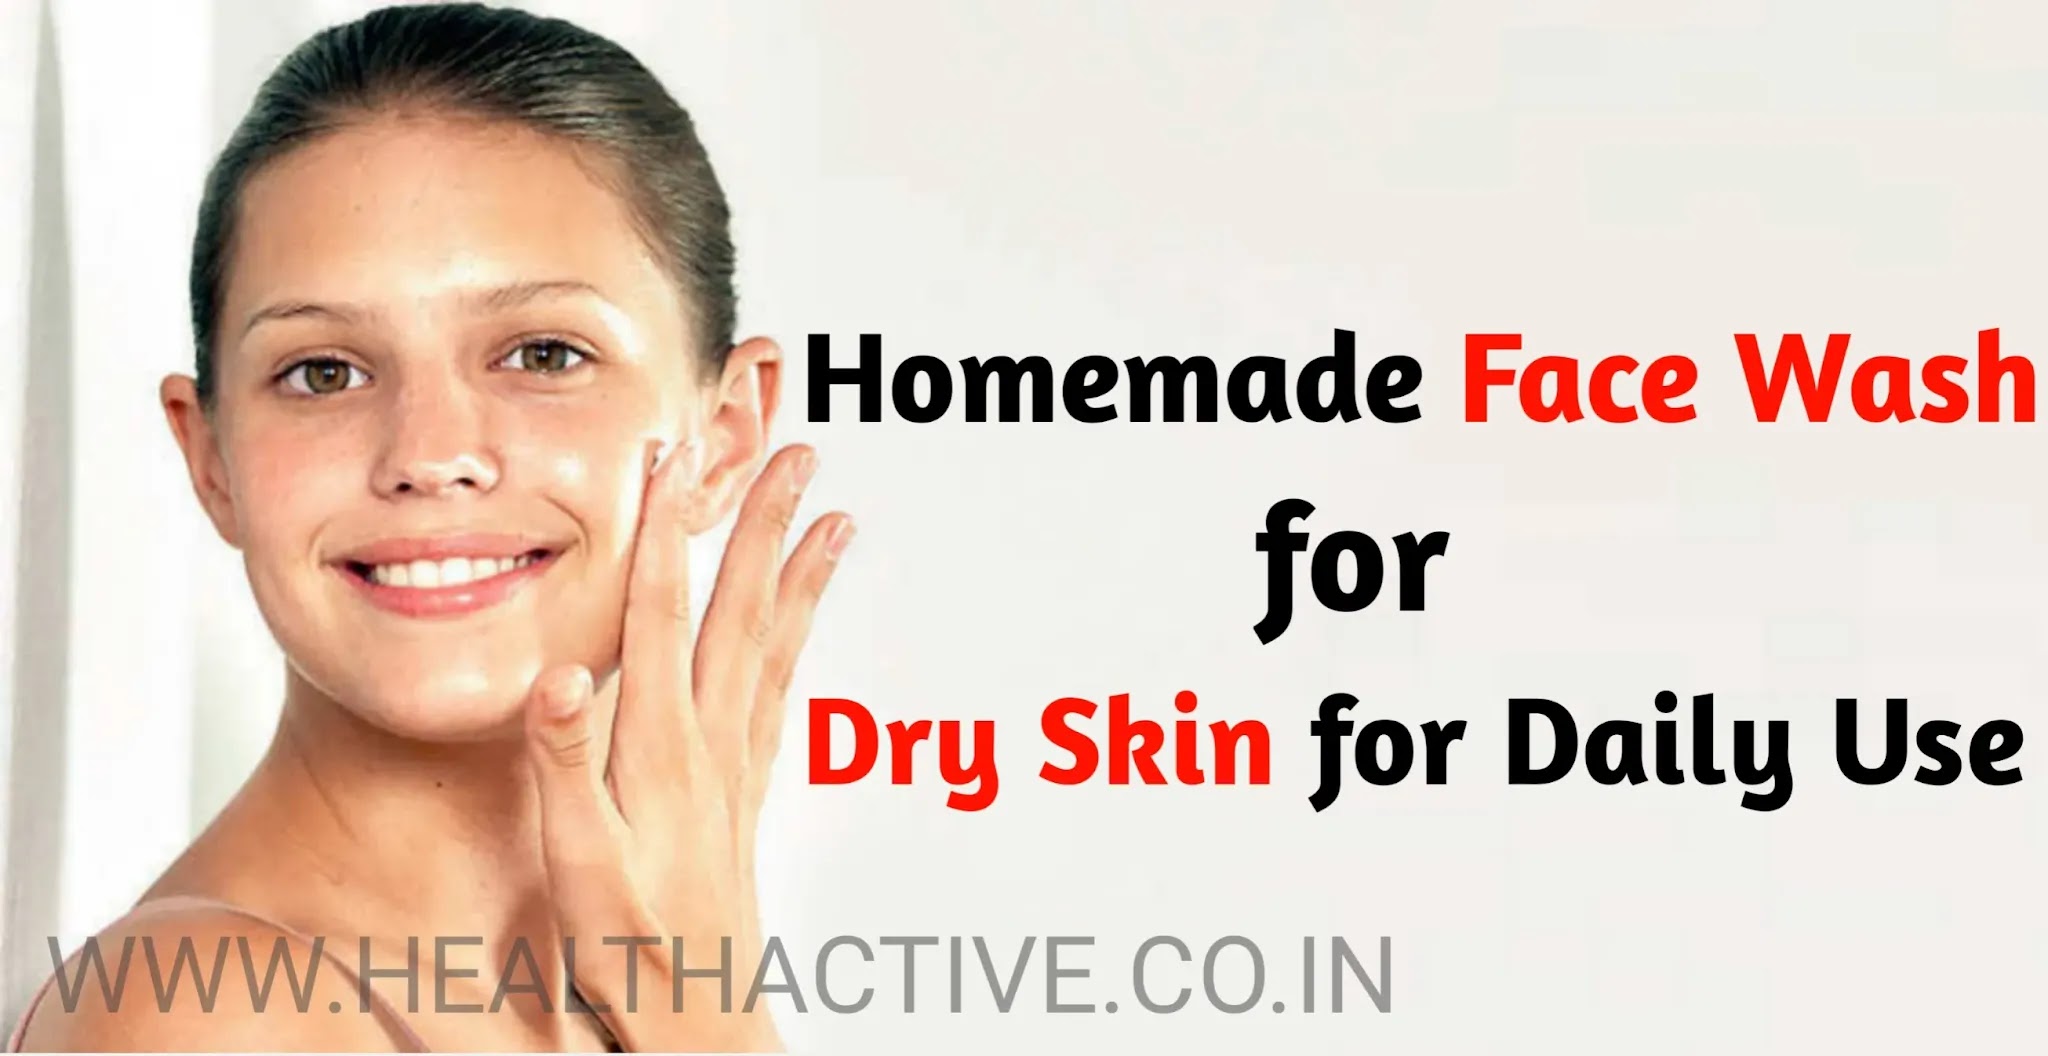 Homemade Face Wash for Dry Skin for Daily Use